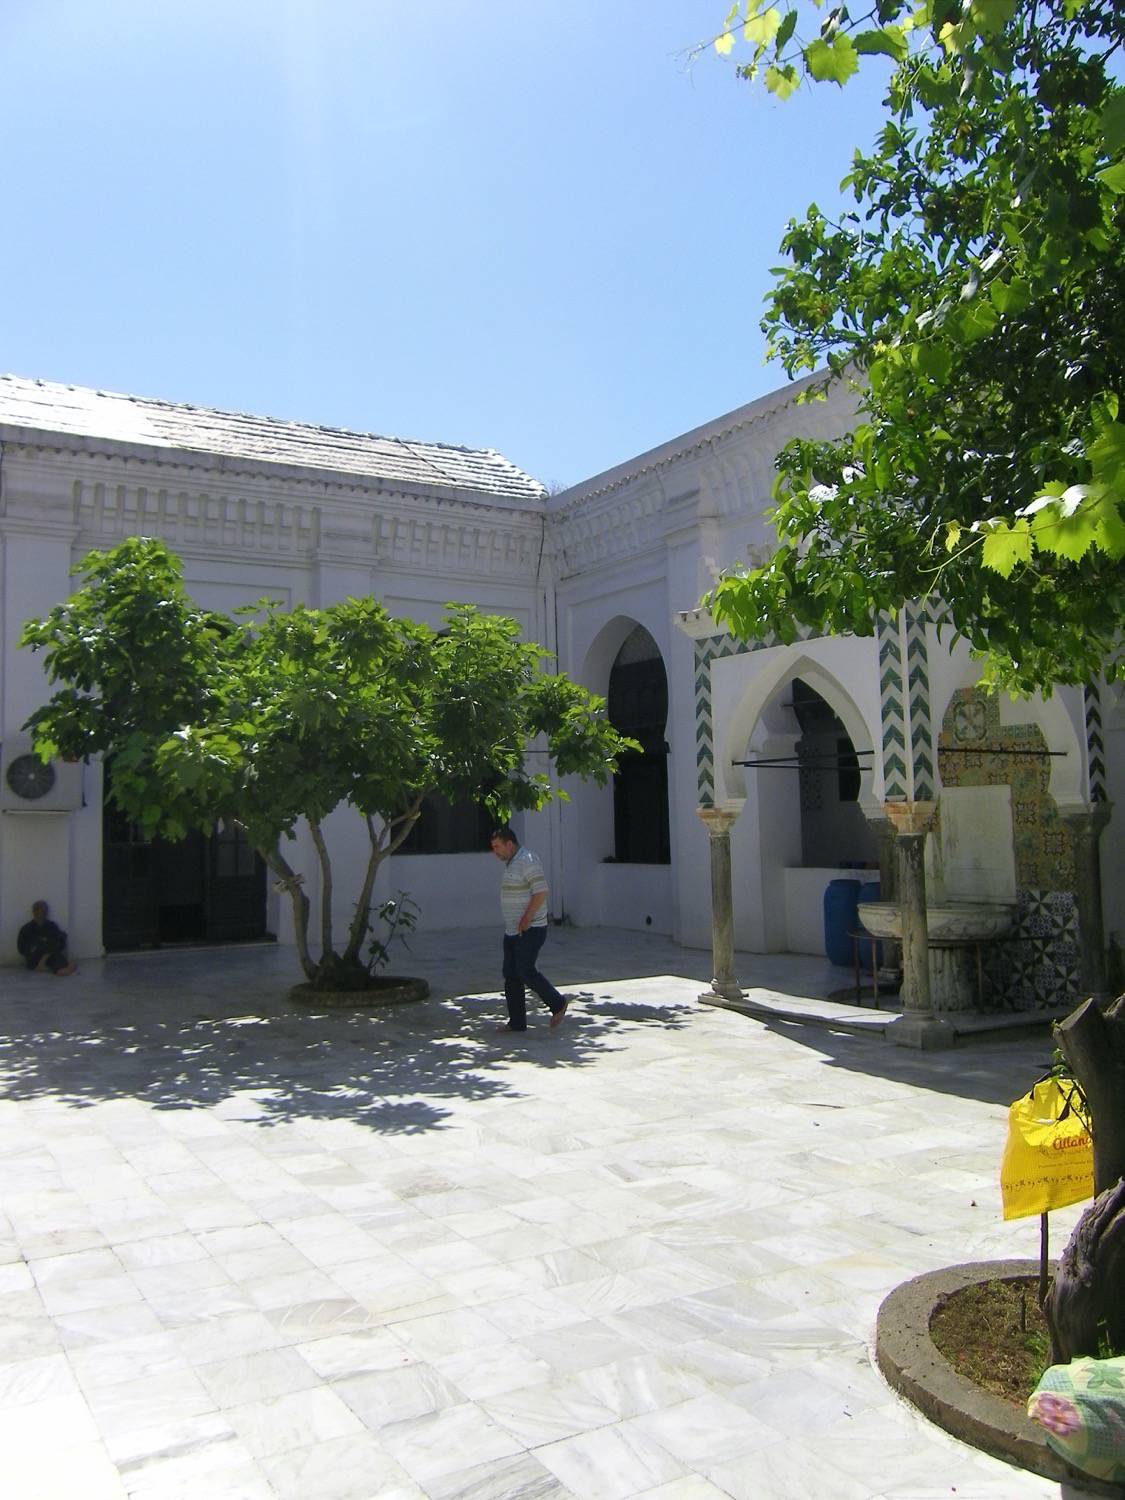 Jami' al-Kabir (Algiers) - Courtyard view with trees and ablution fountain to the left